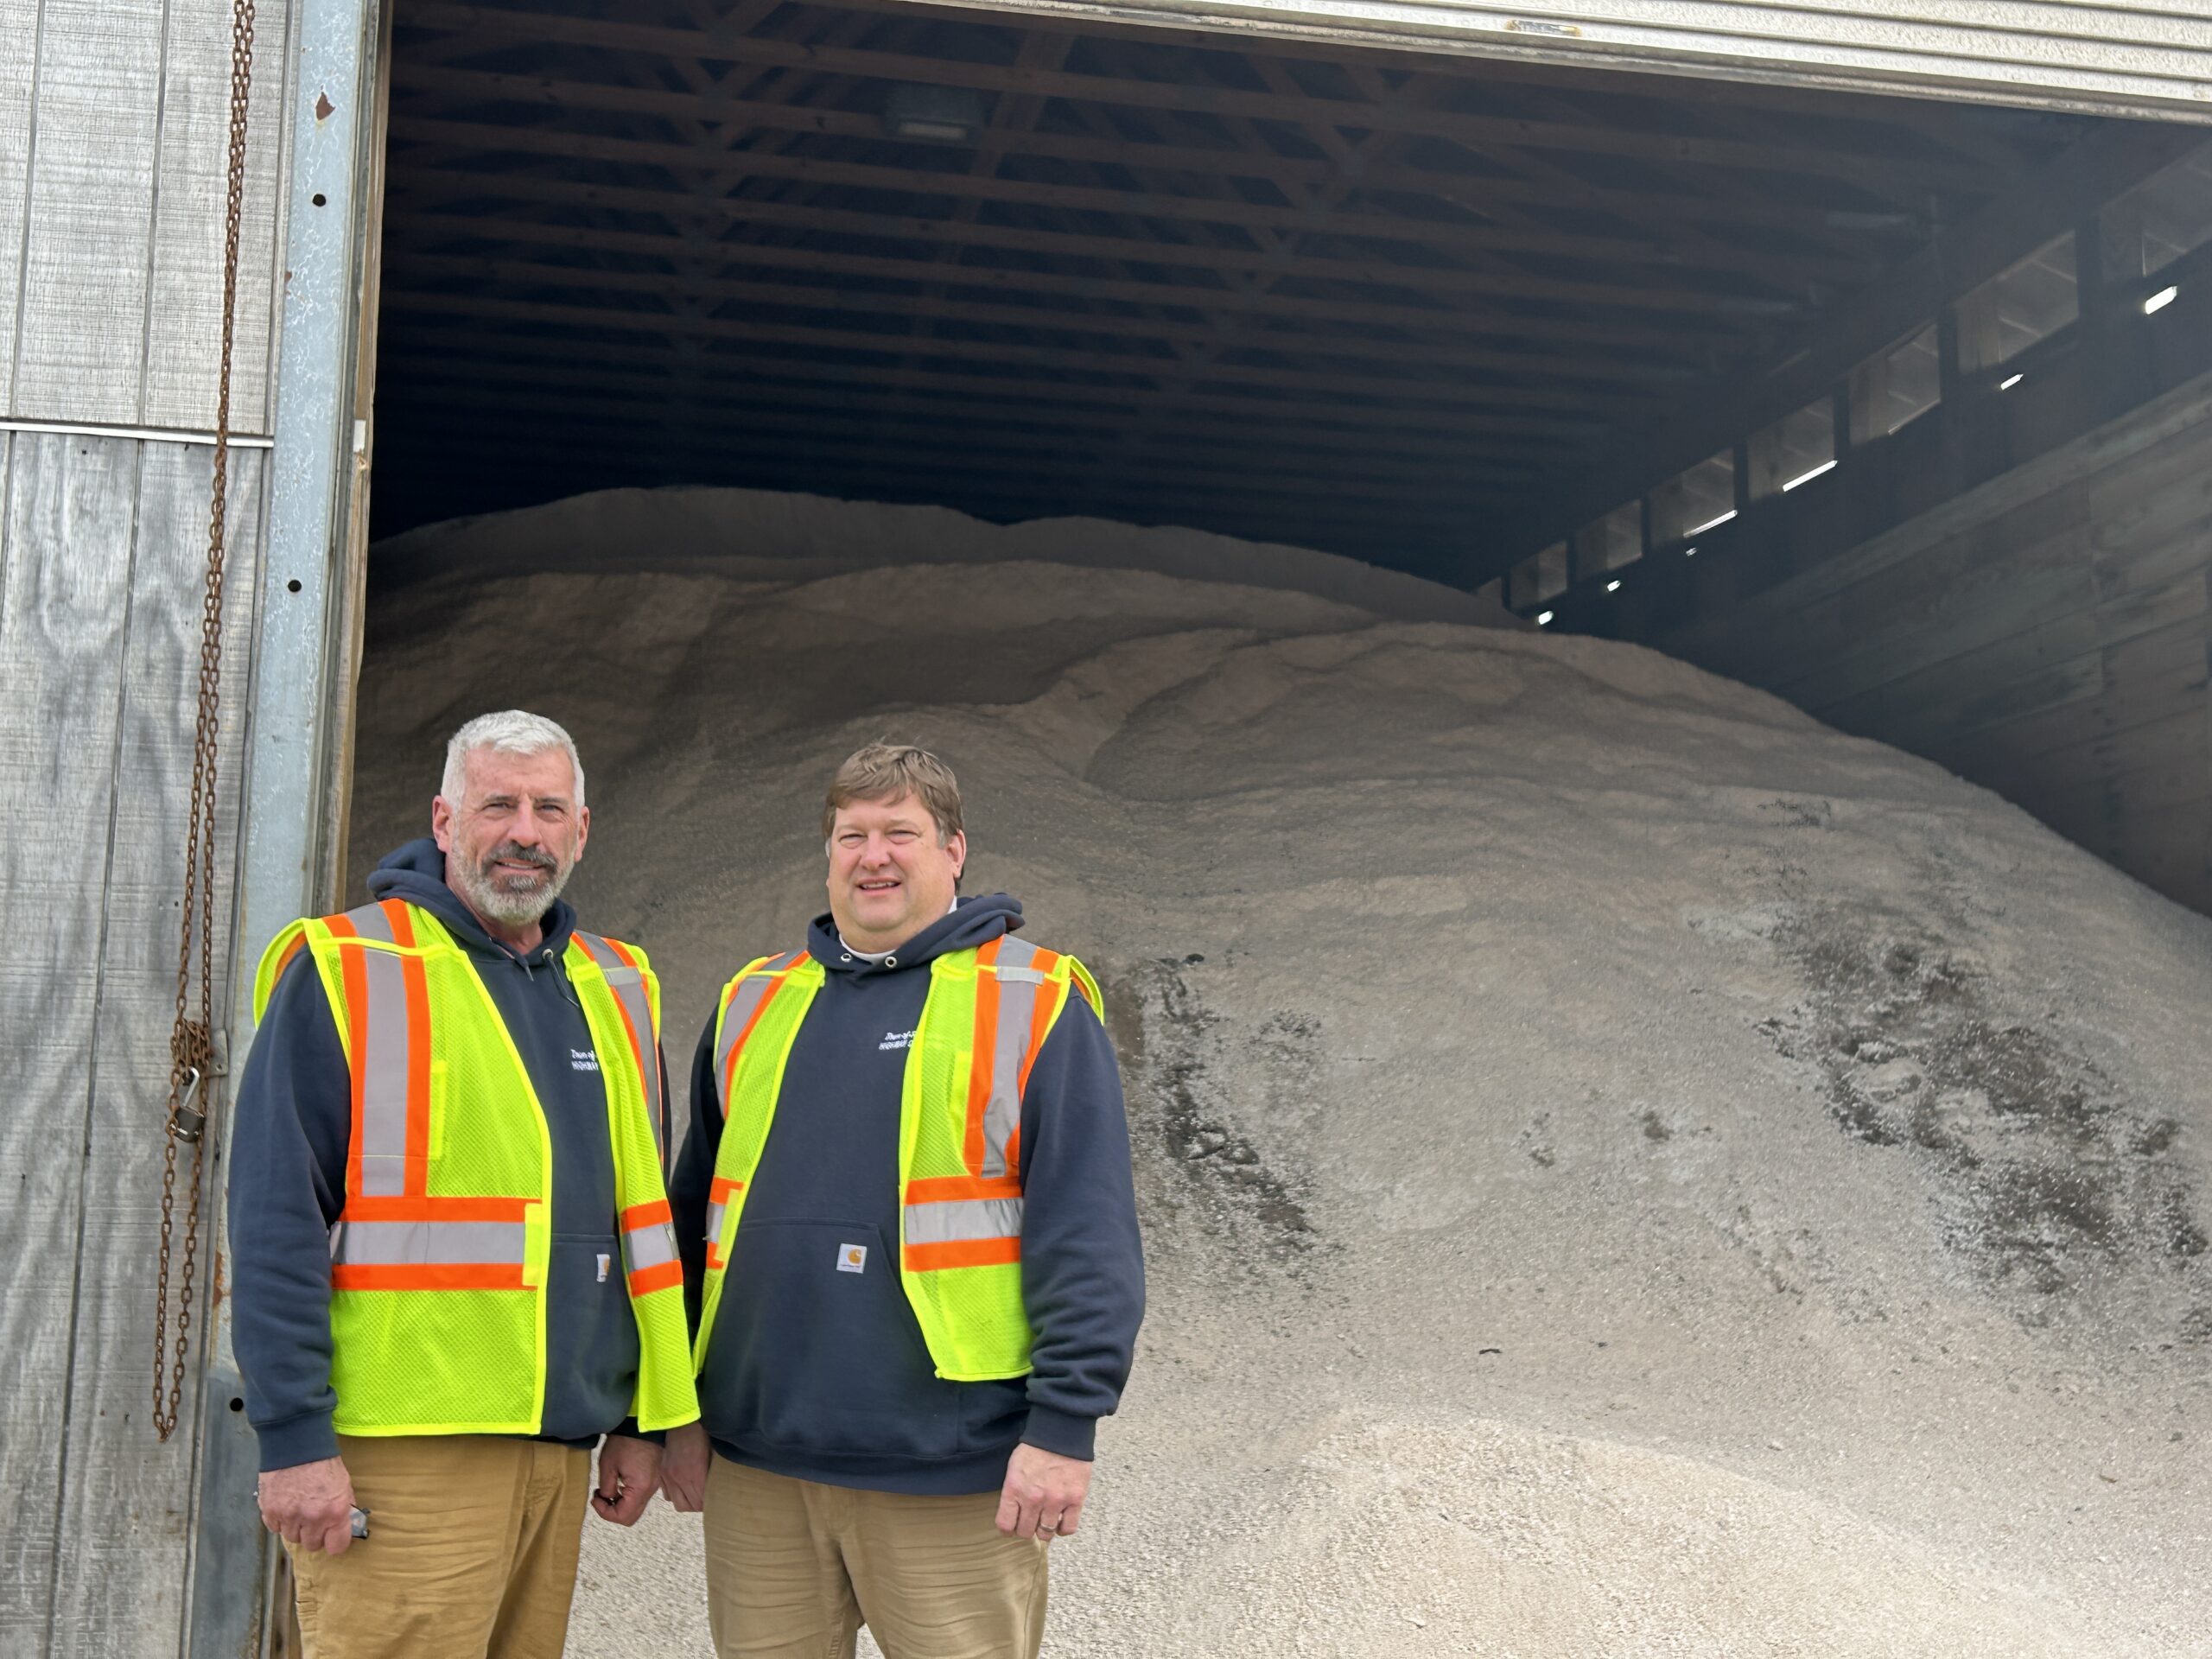 Southampton Town Highway Superintendent Charles McArdle and Deputy Superintendent Marc Braeger will the latest delivery of salt stockpiled n Hampton Bays.    KITTY MERRILL